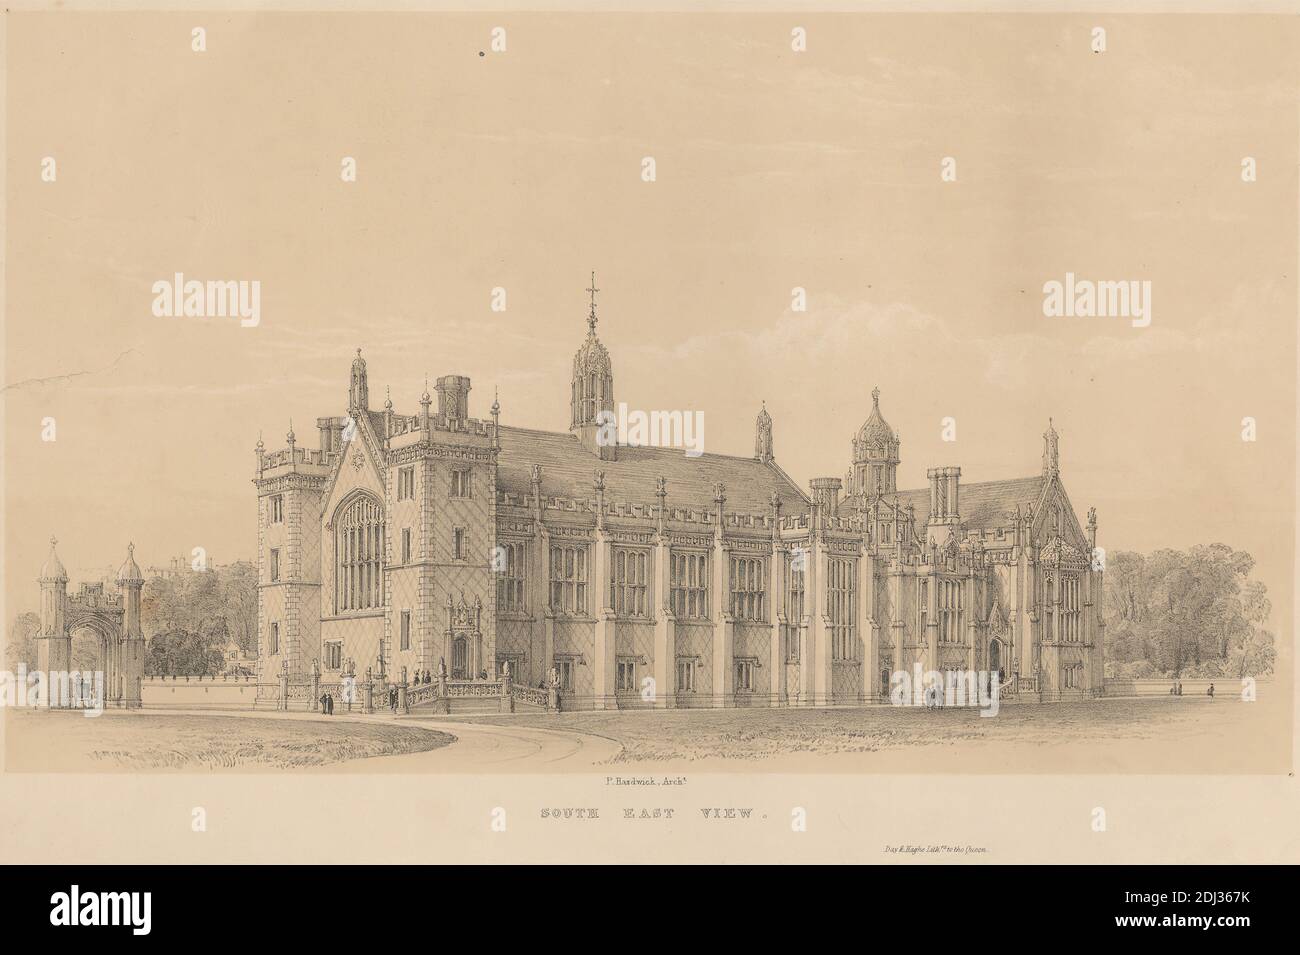 South East View, Lincoln's Inn, Print made by Day & Haghe, 1824–1913, British, after Philip Hardwick, 1792–1870, British, between 1845 and 1850, Lithograph on thick, slightly textured, beige wove paper, Sheet: 11 1/4 x 15 3/4 inches (28.5 x 40 cm) and Image: 6 15/16 x 11 11/16 inches (17.6 x 29.7 cm), arch, architectural subject, architecture, carriage, coats, costume, crosses (objects), figures, gate, hall, law (discipline), lawyers, library (building), men, path, road, square, trees, turrets (towers), walking, England, Greater London, Holborn, London, The Honourable Society of Lincoln's Inn Stock Photo